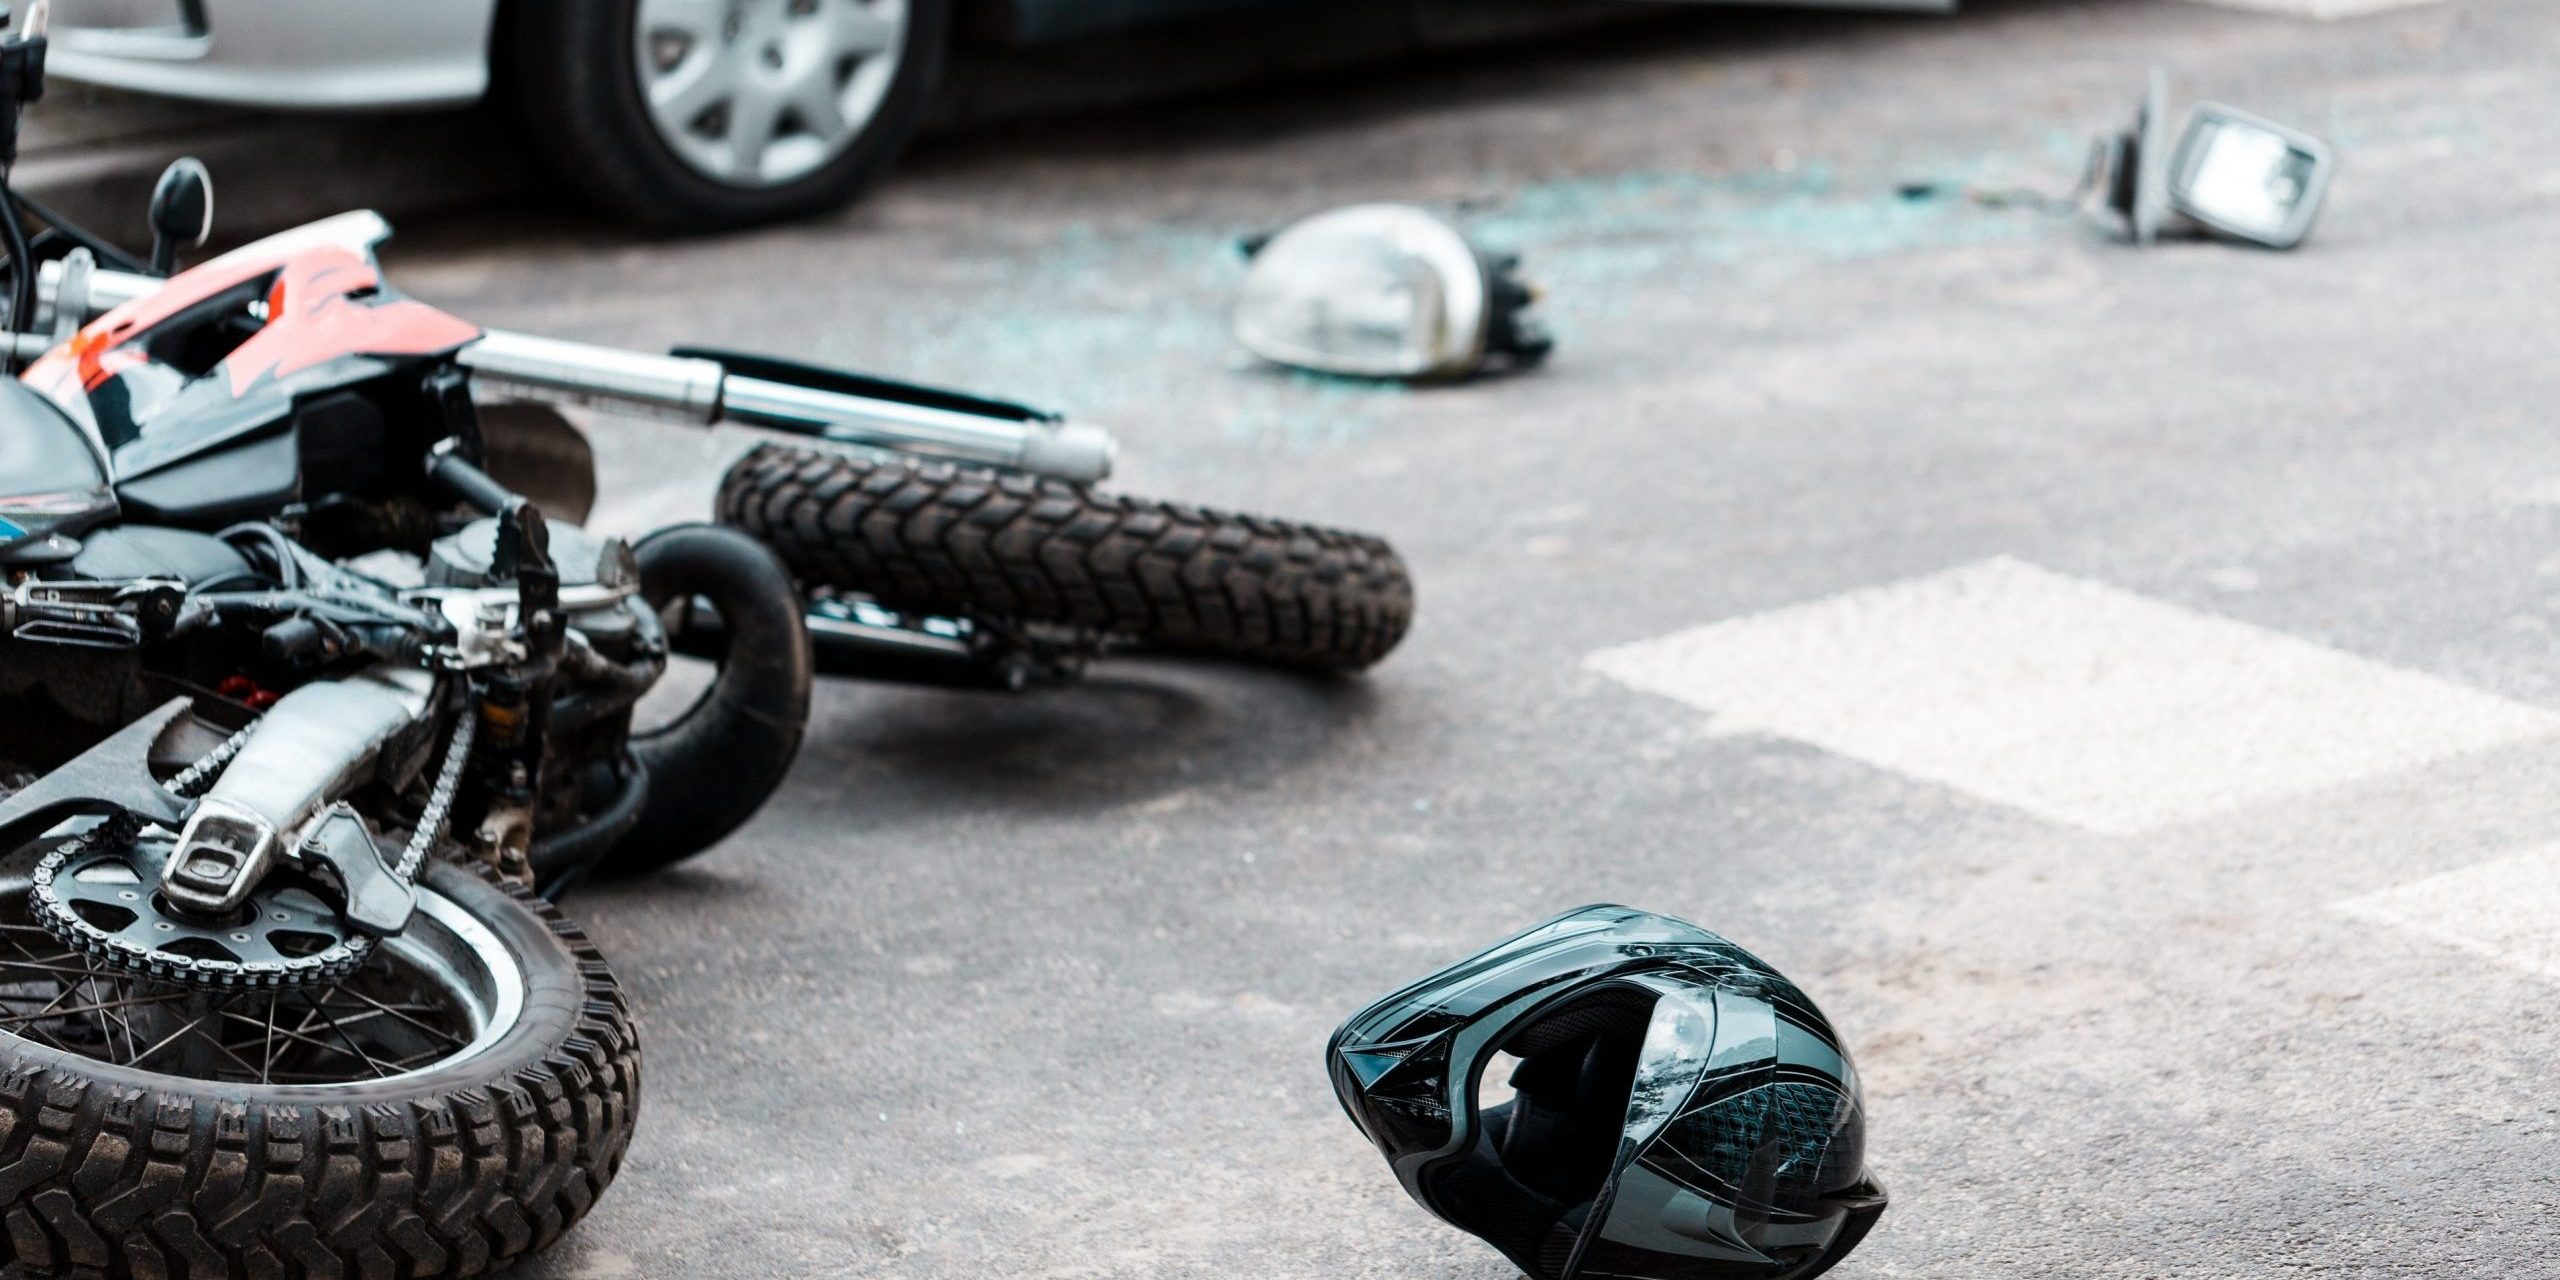 Overturned motorcycle and helmet on the street after collision with a car